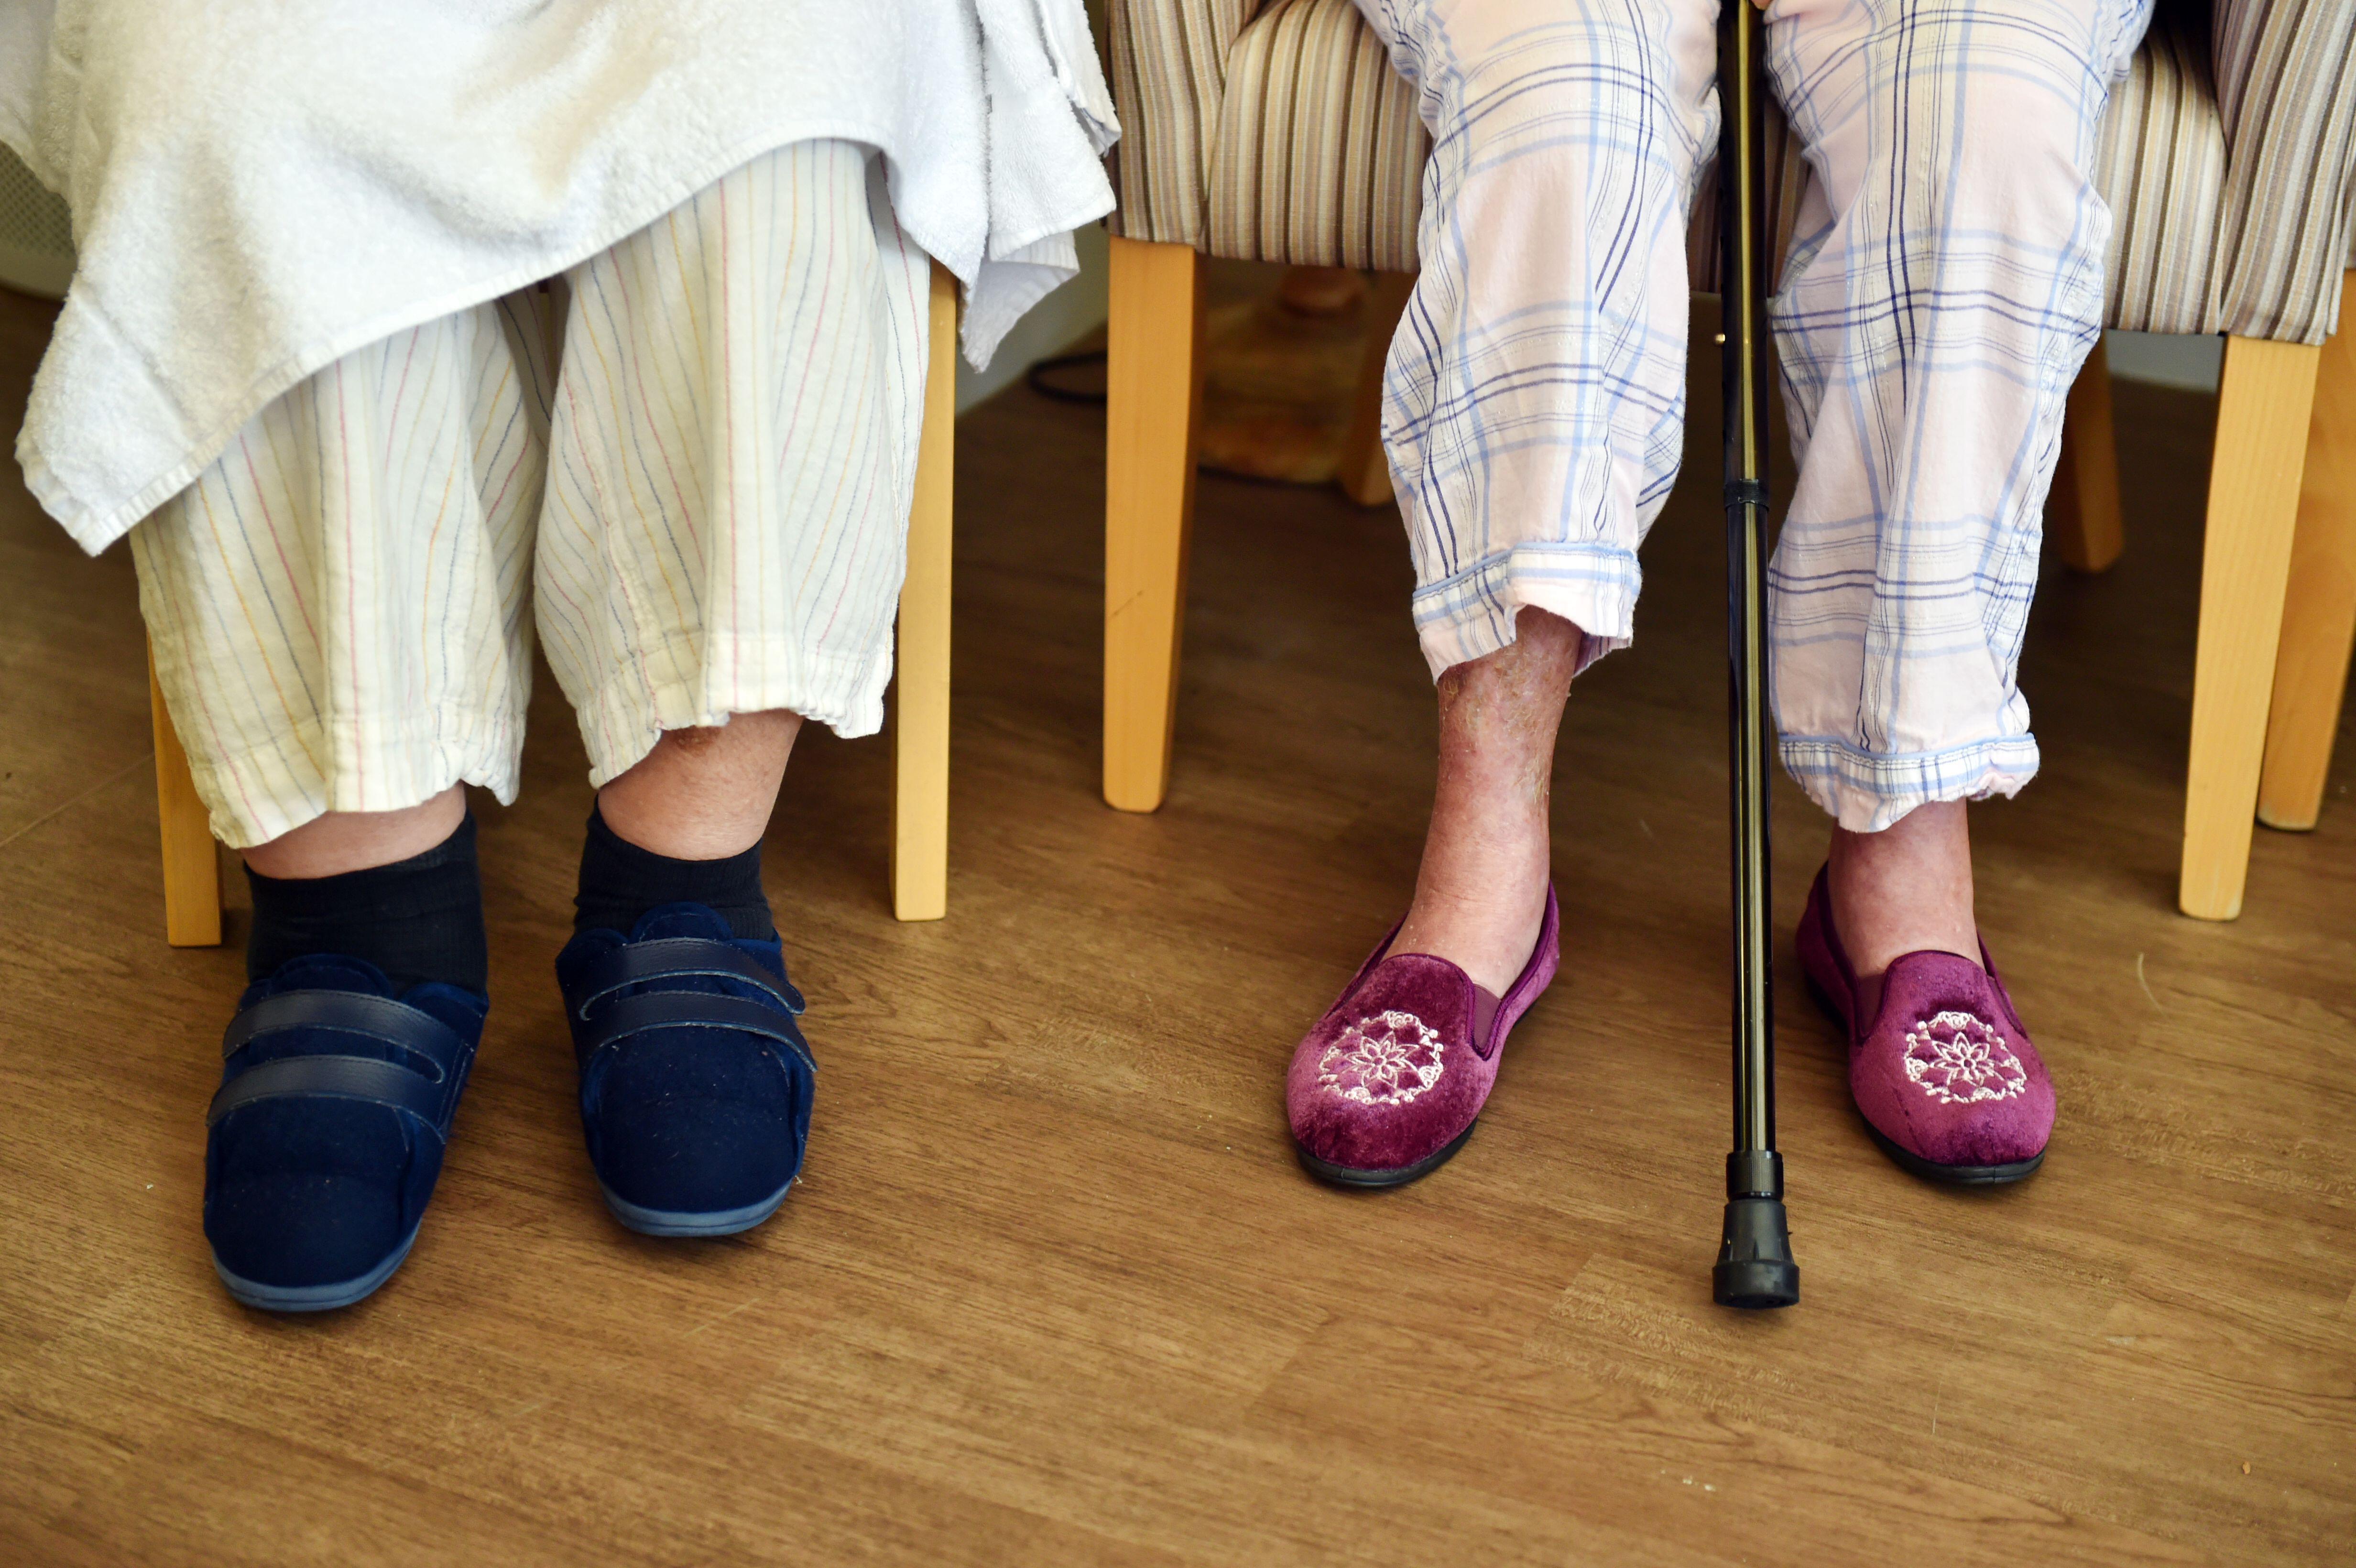 Feet of elderly residents in a care home in the UK